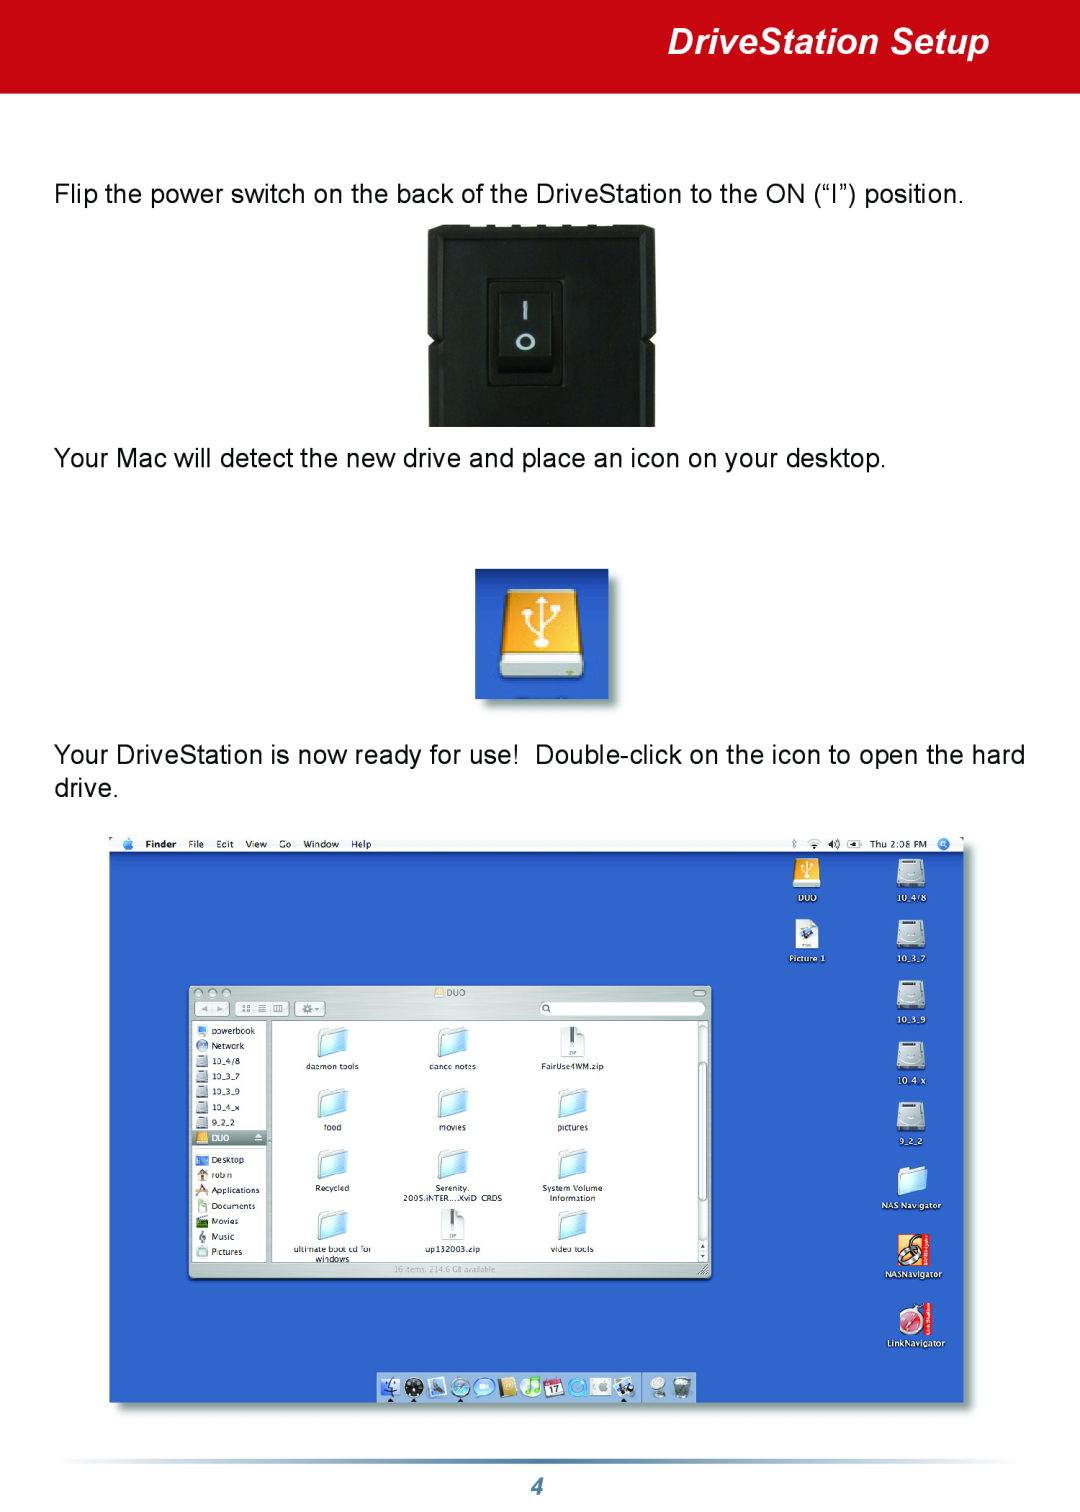 Buffalo Technology v1.1 manual DriveStation Setup, Your Mac will detect the new drive and place an icon on your desktop 